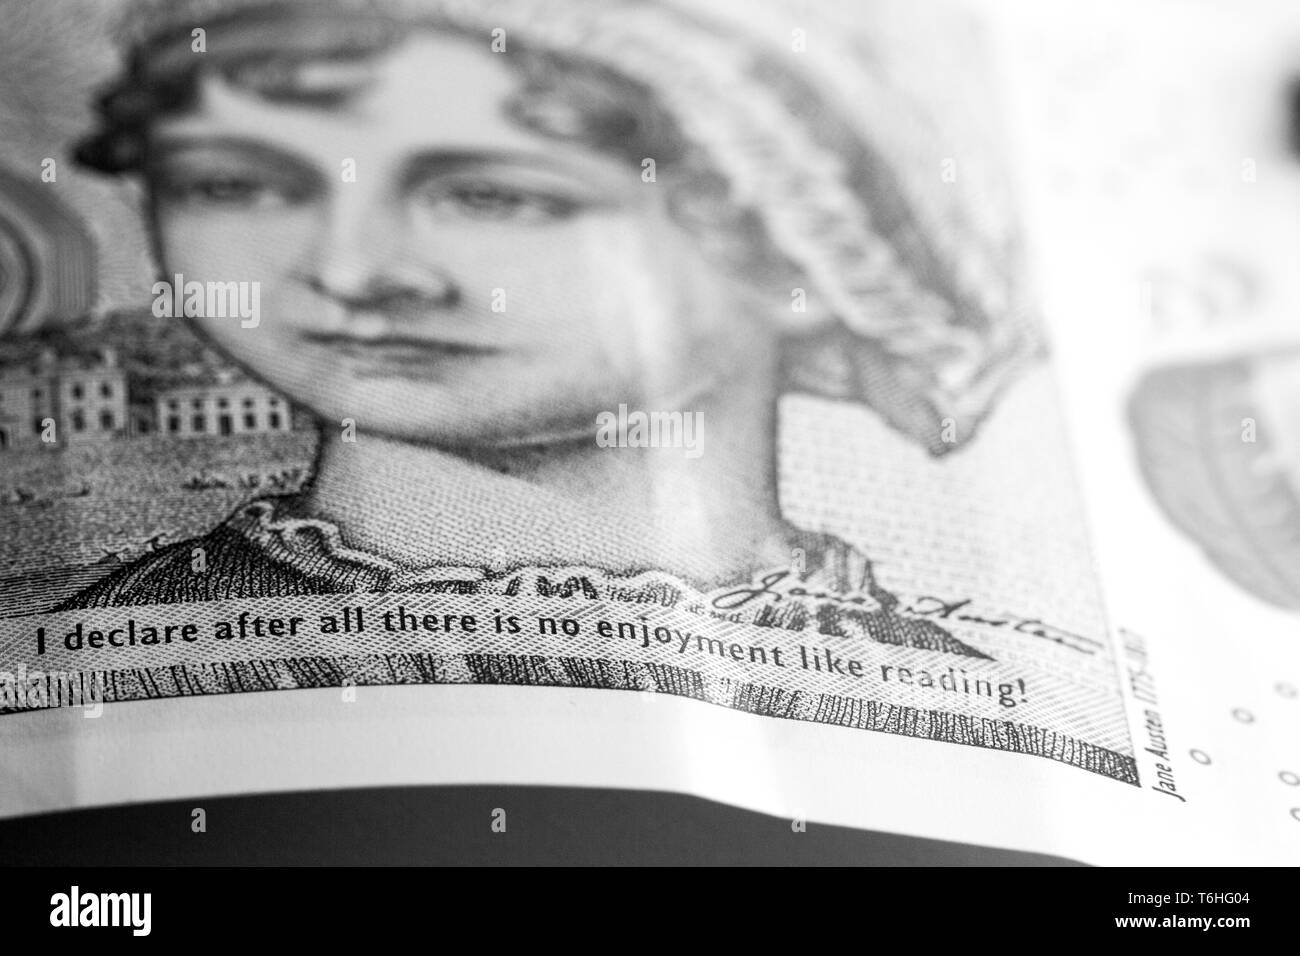 Close-up, macro photo of £10. Ten pounds sterling. Jane Austen quote: 'I declare after all there is no enjoyment like reading!' Stock Photo